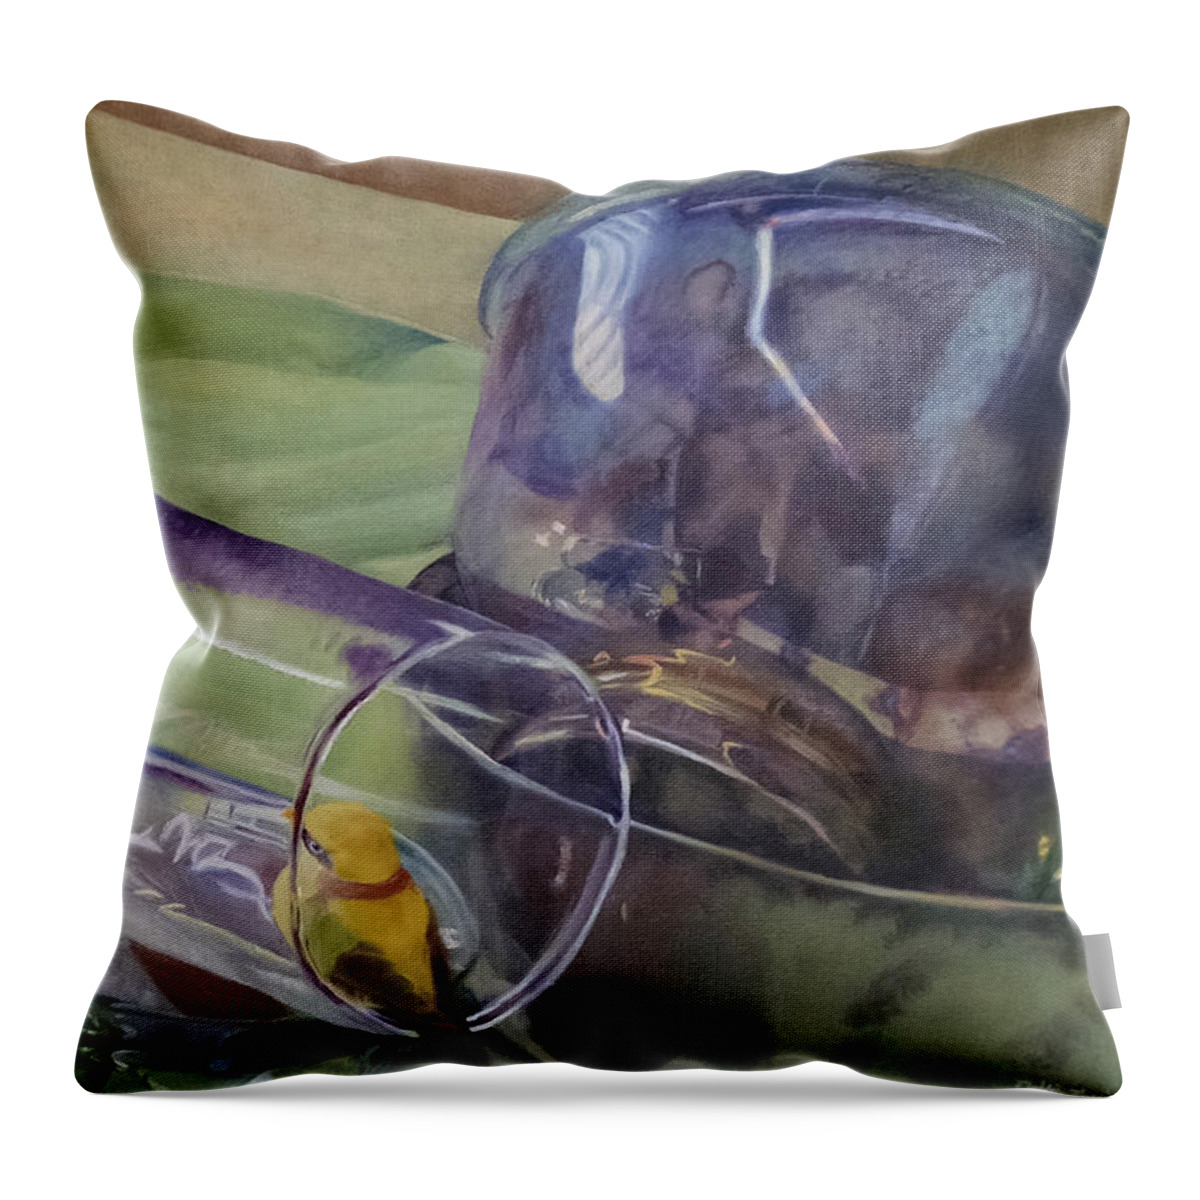 Bowls Throw Pillow featuring the painting Silver Bowls by Maddie Morriss